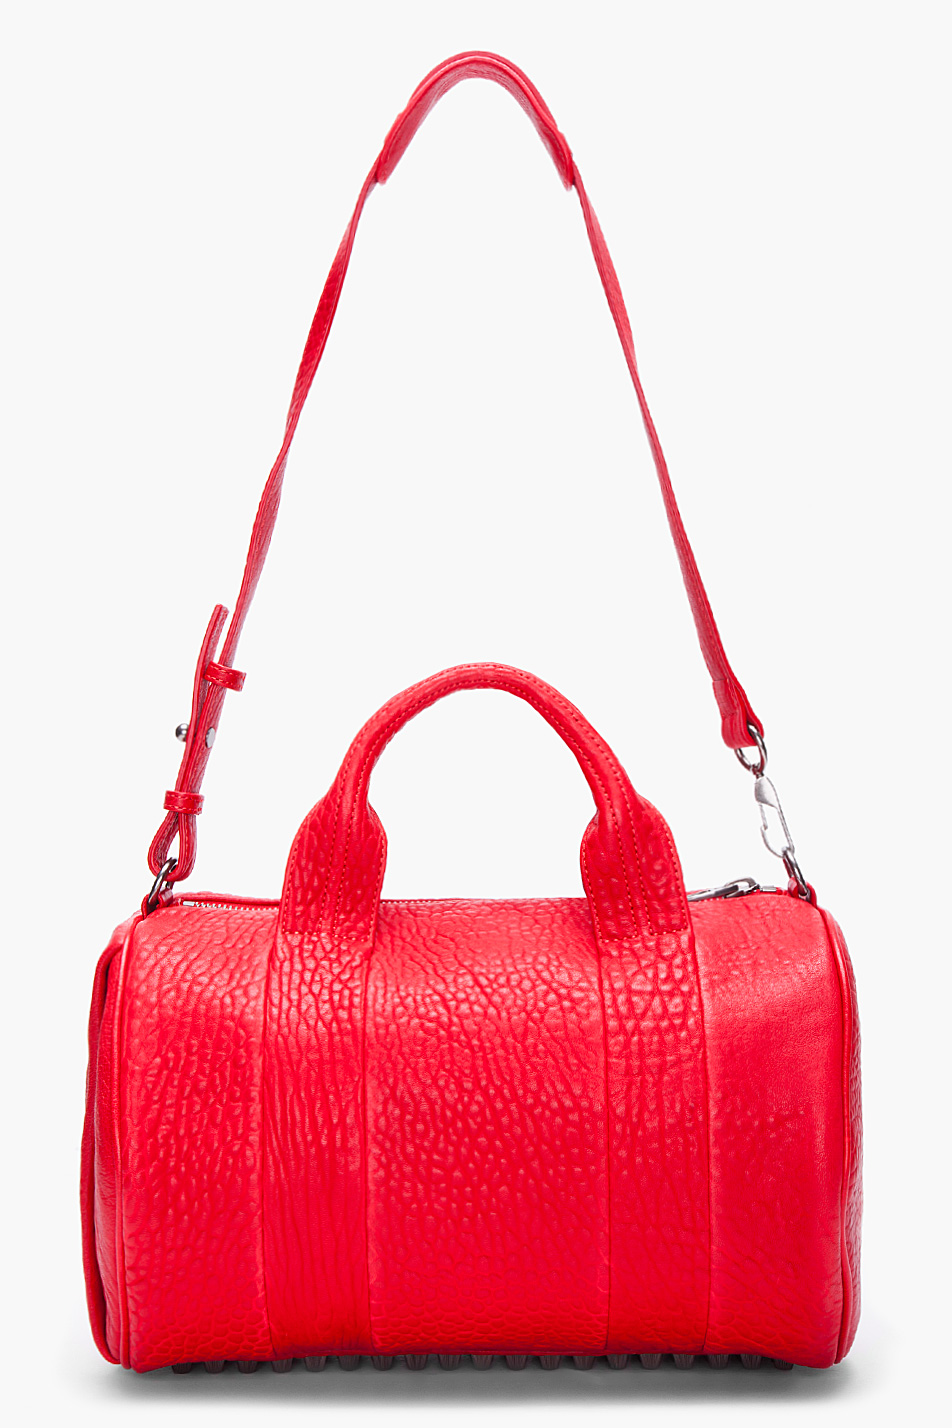 Alexander Wang Rocco Bag in Red - Lyst